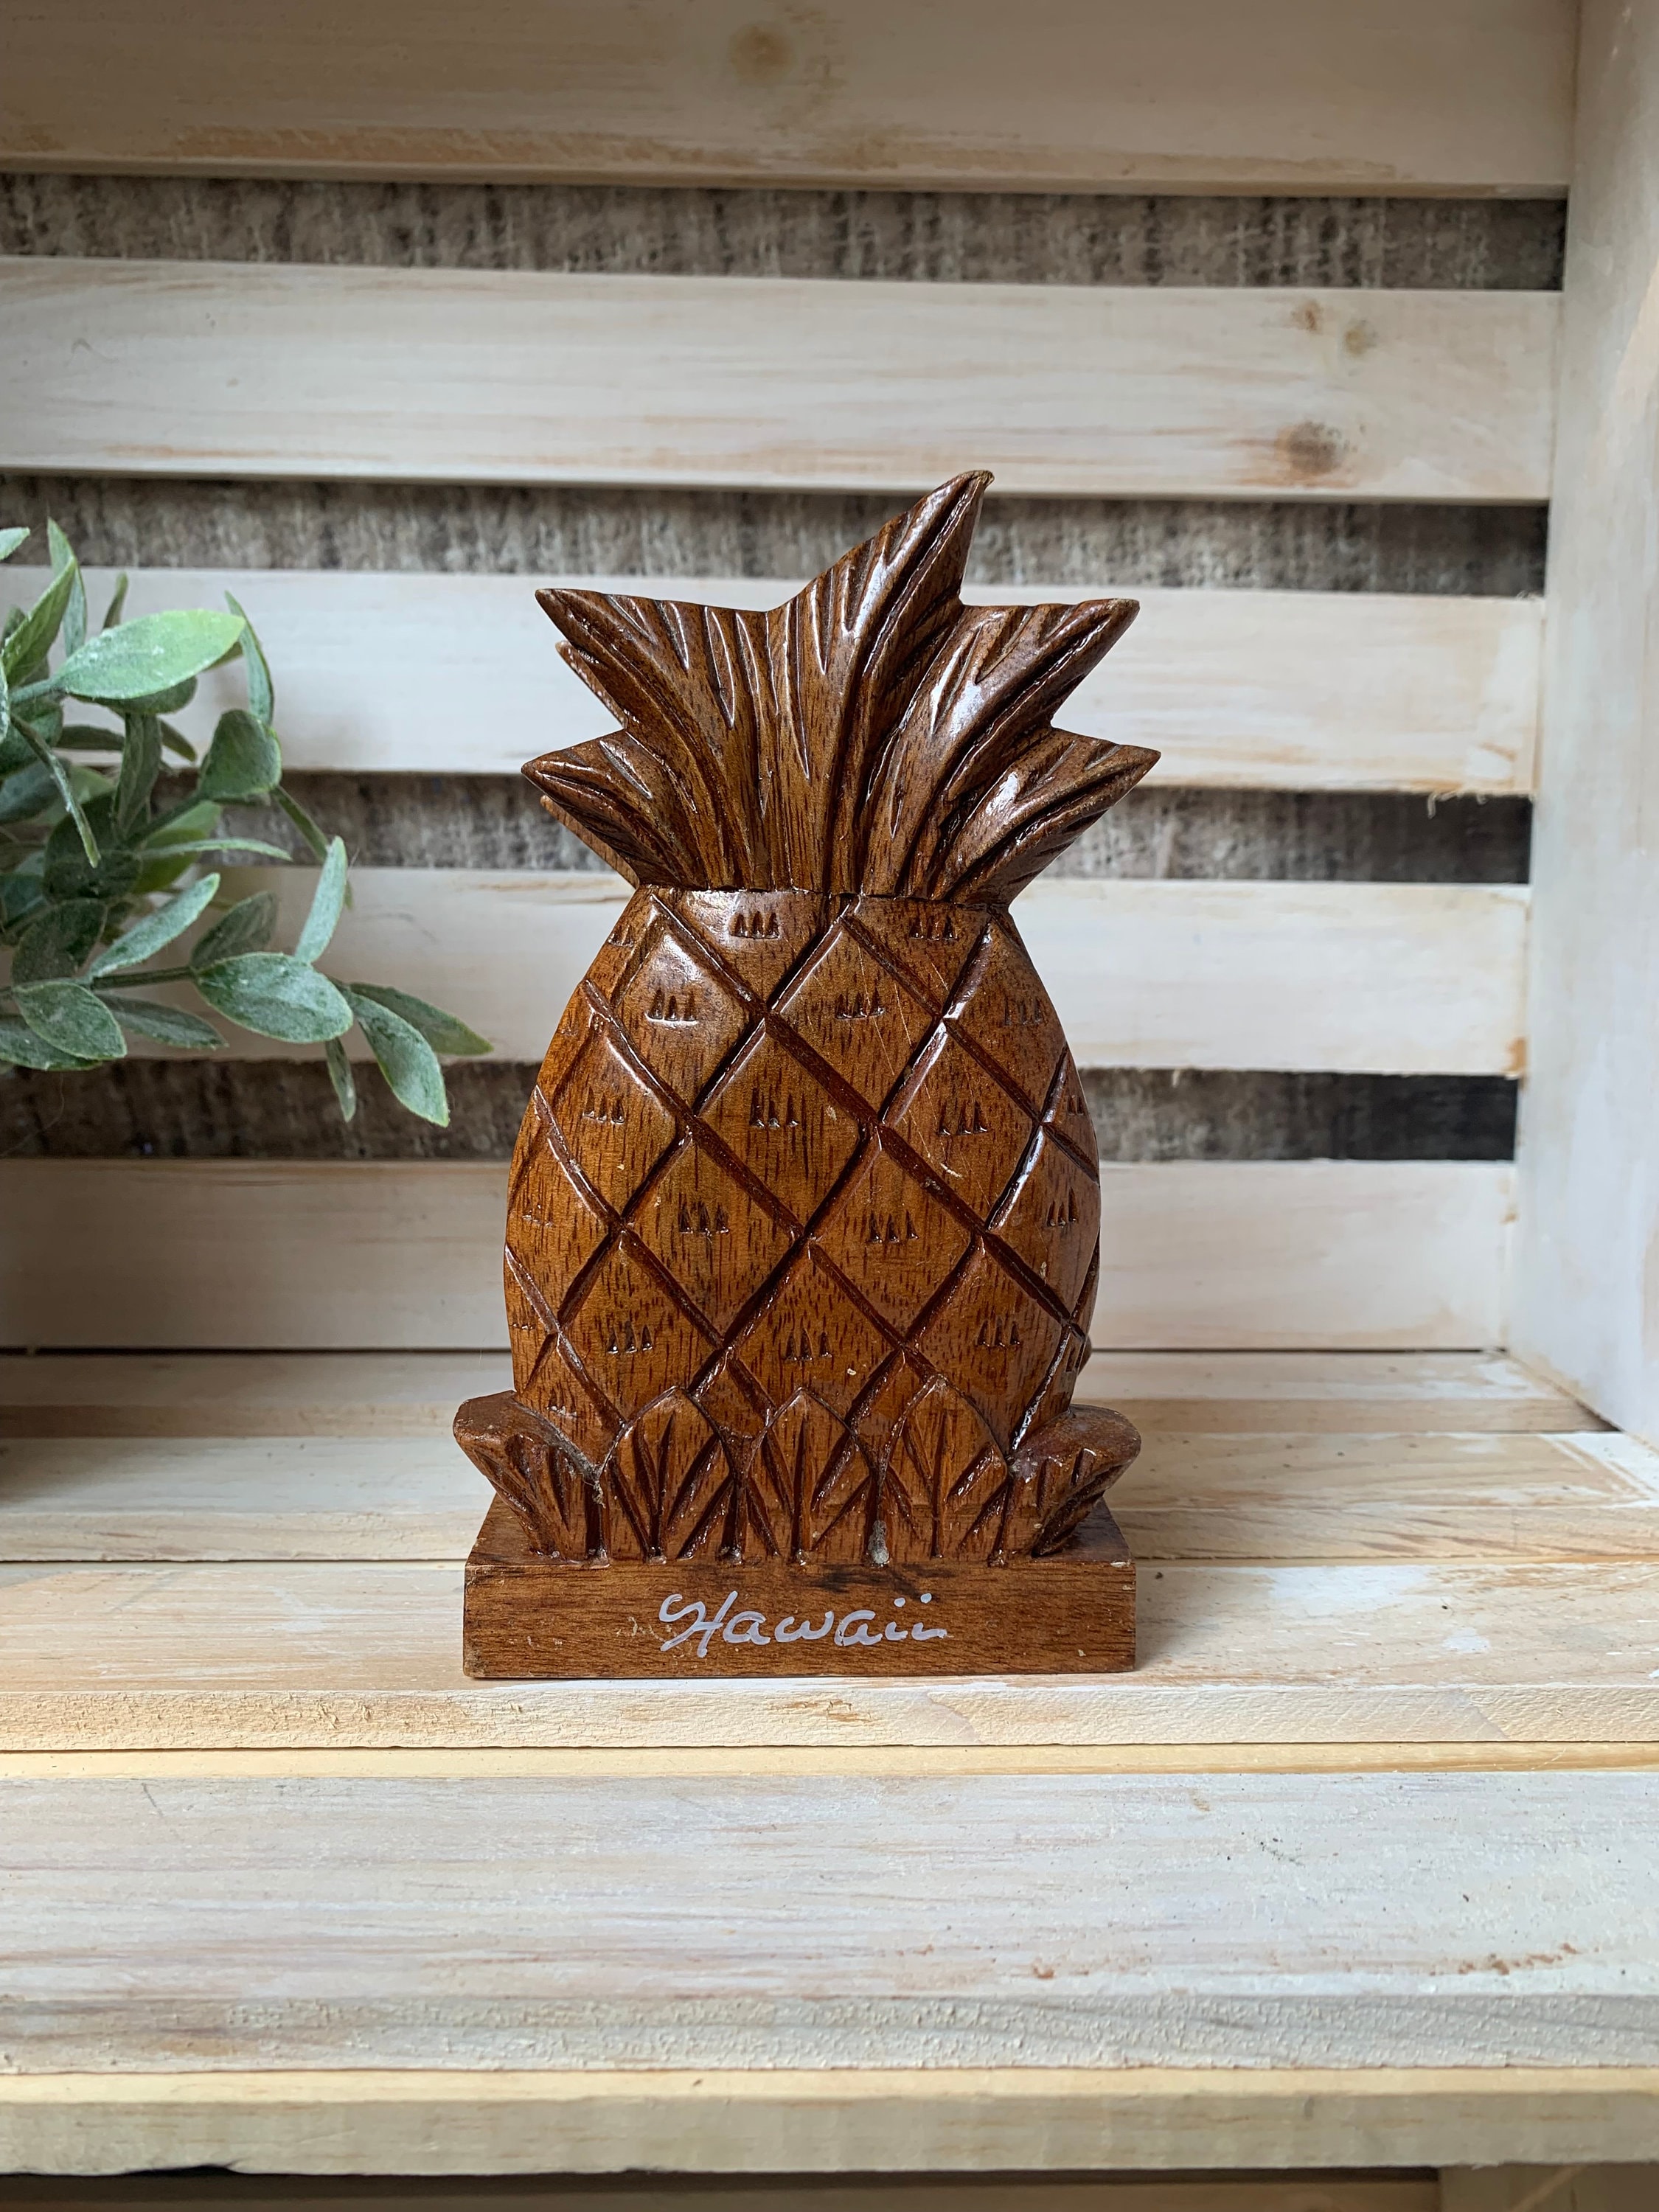 Made in Hawaii wooden cutting board - Pineapple – Red Pineapple